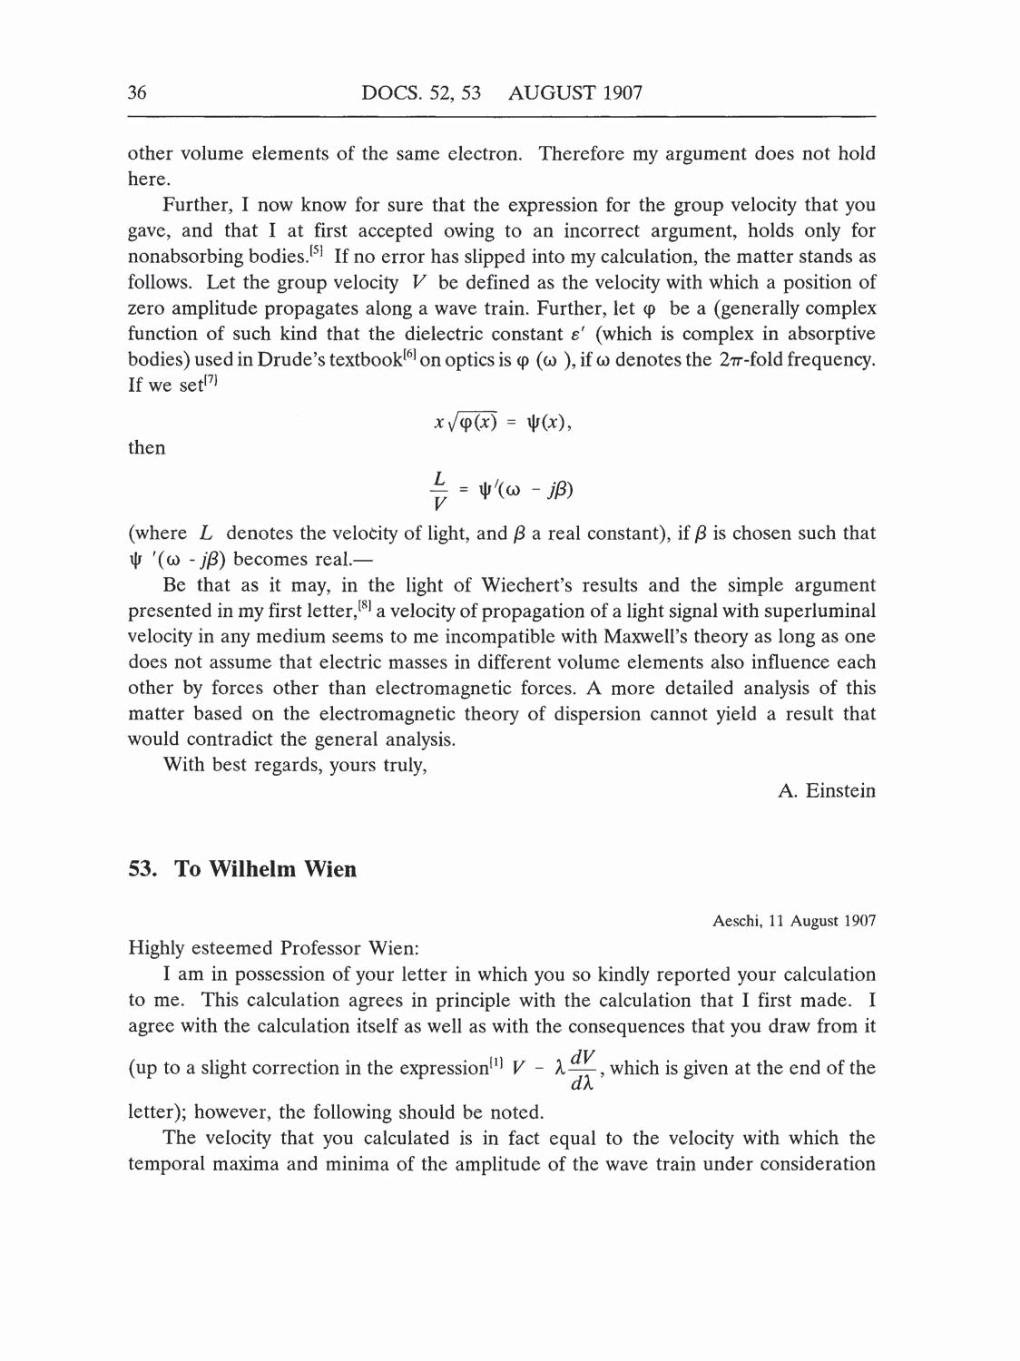 Volume 5: The Swiss Years: Correspondence, 1902-1914 (English translation supplement) page 36